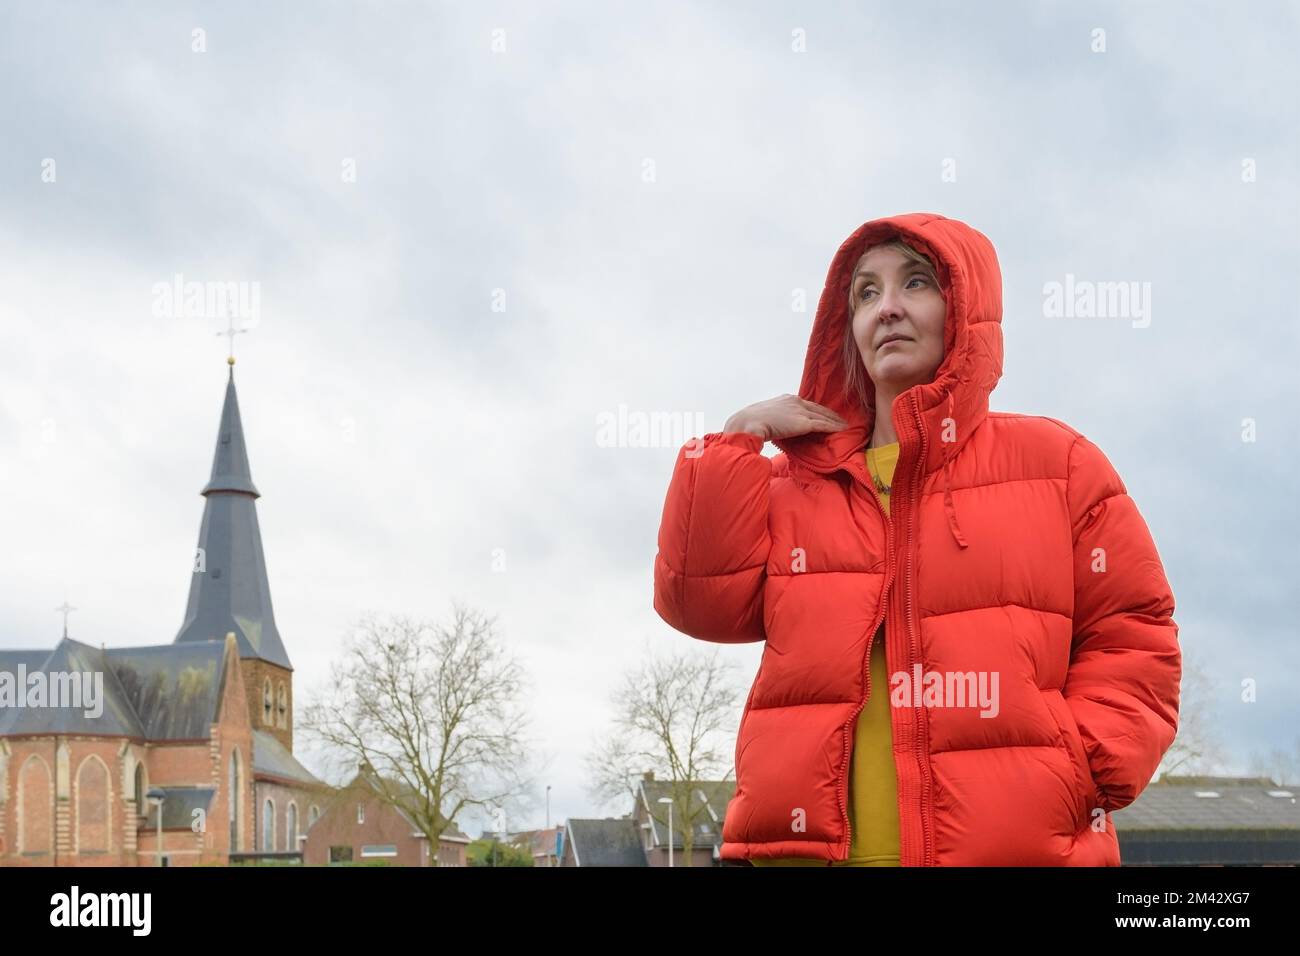 Woman in a red jacket. Portrait of woman against an old catholic church and cloudy sky. copy space Stock Photo